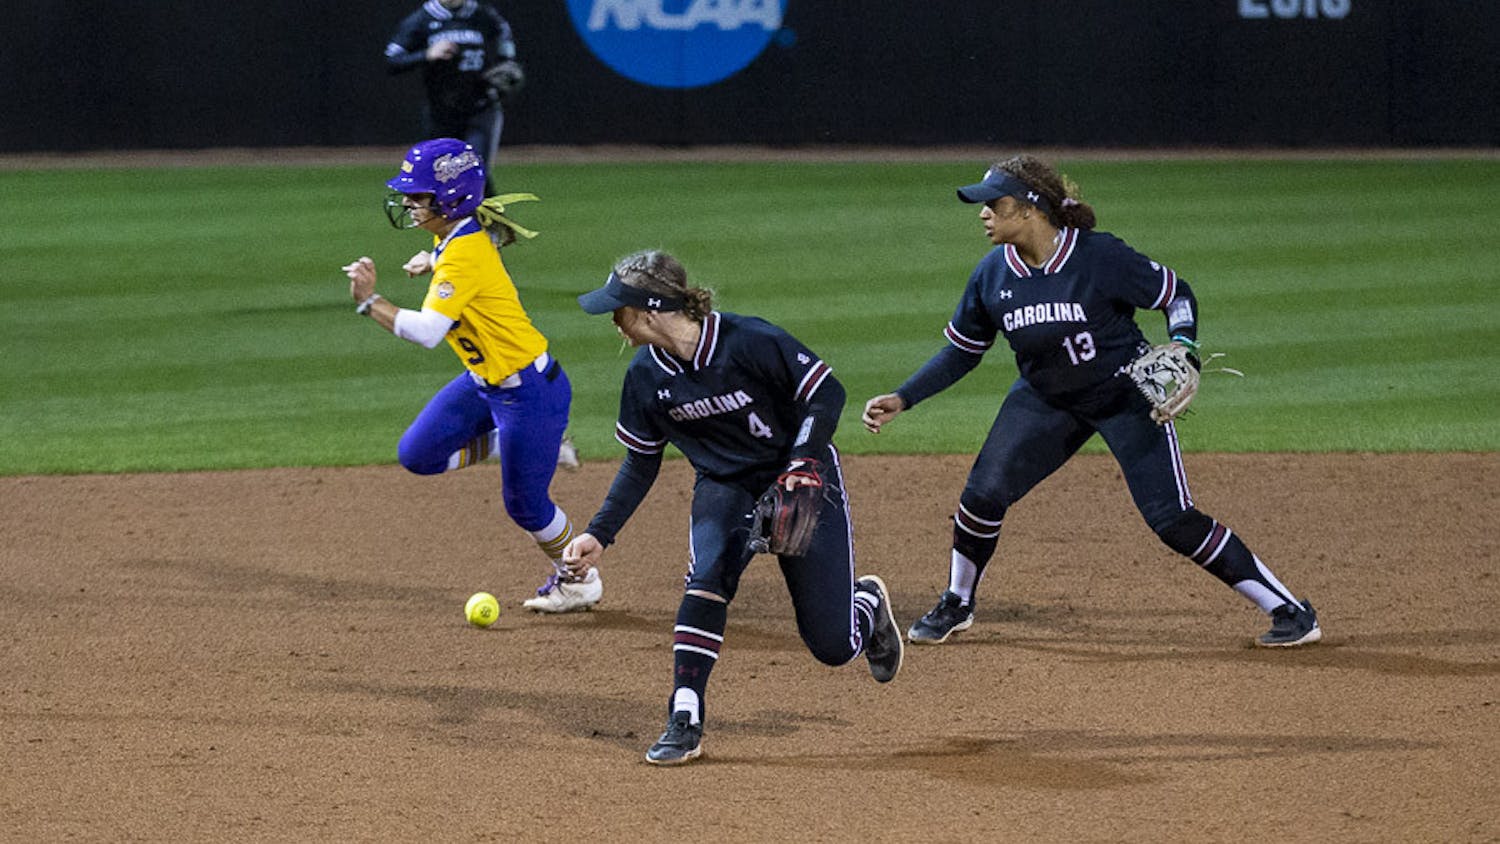 LSU sophomore outfielder Madilyn Giglio runs past South Carolina's offense after sophomore infielder Brooke Blankenship makes an error on the play, allowing two RBIs for LSU during the second match of the doubleheader at Beckham Field on March 13, 2023. The Tigers beat the Gamecocks 5-1.